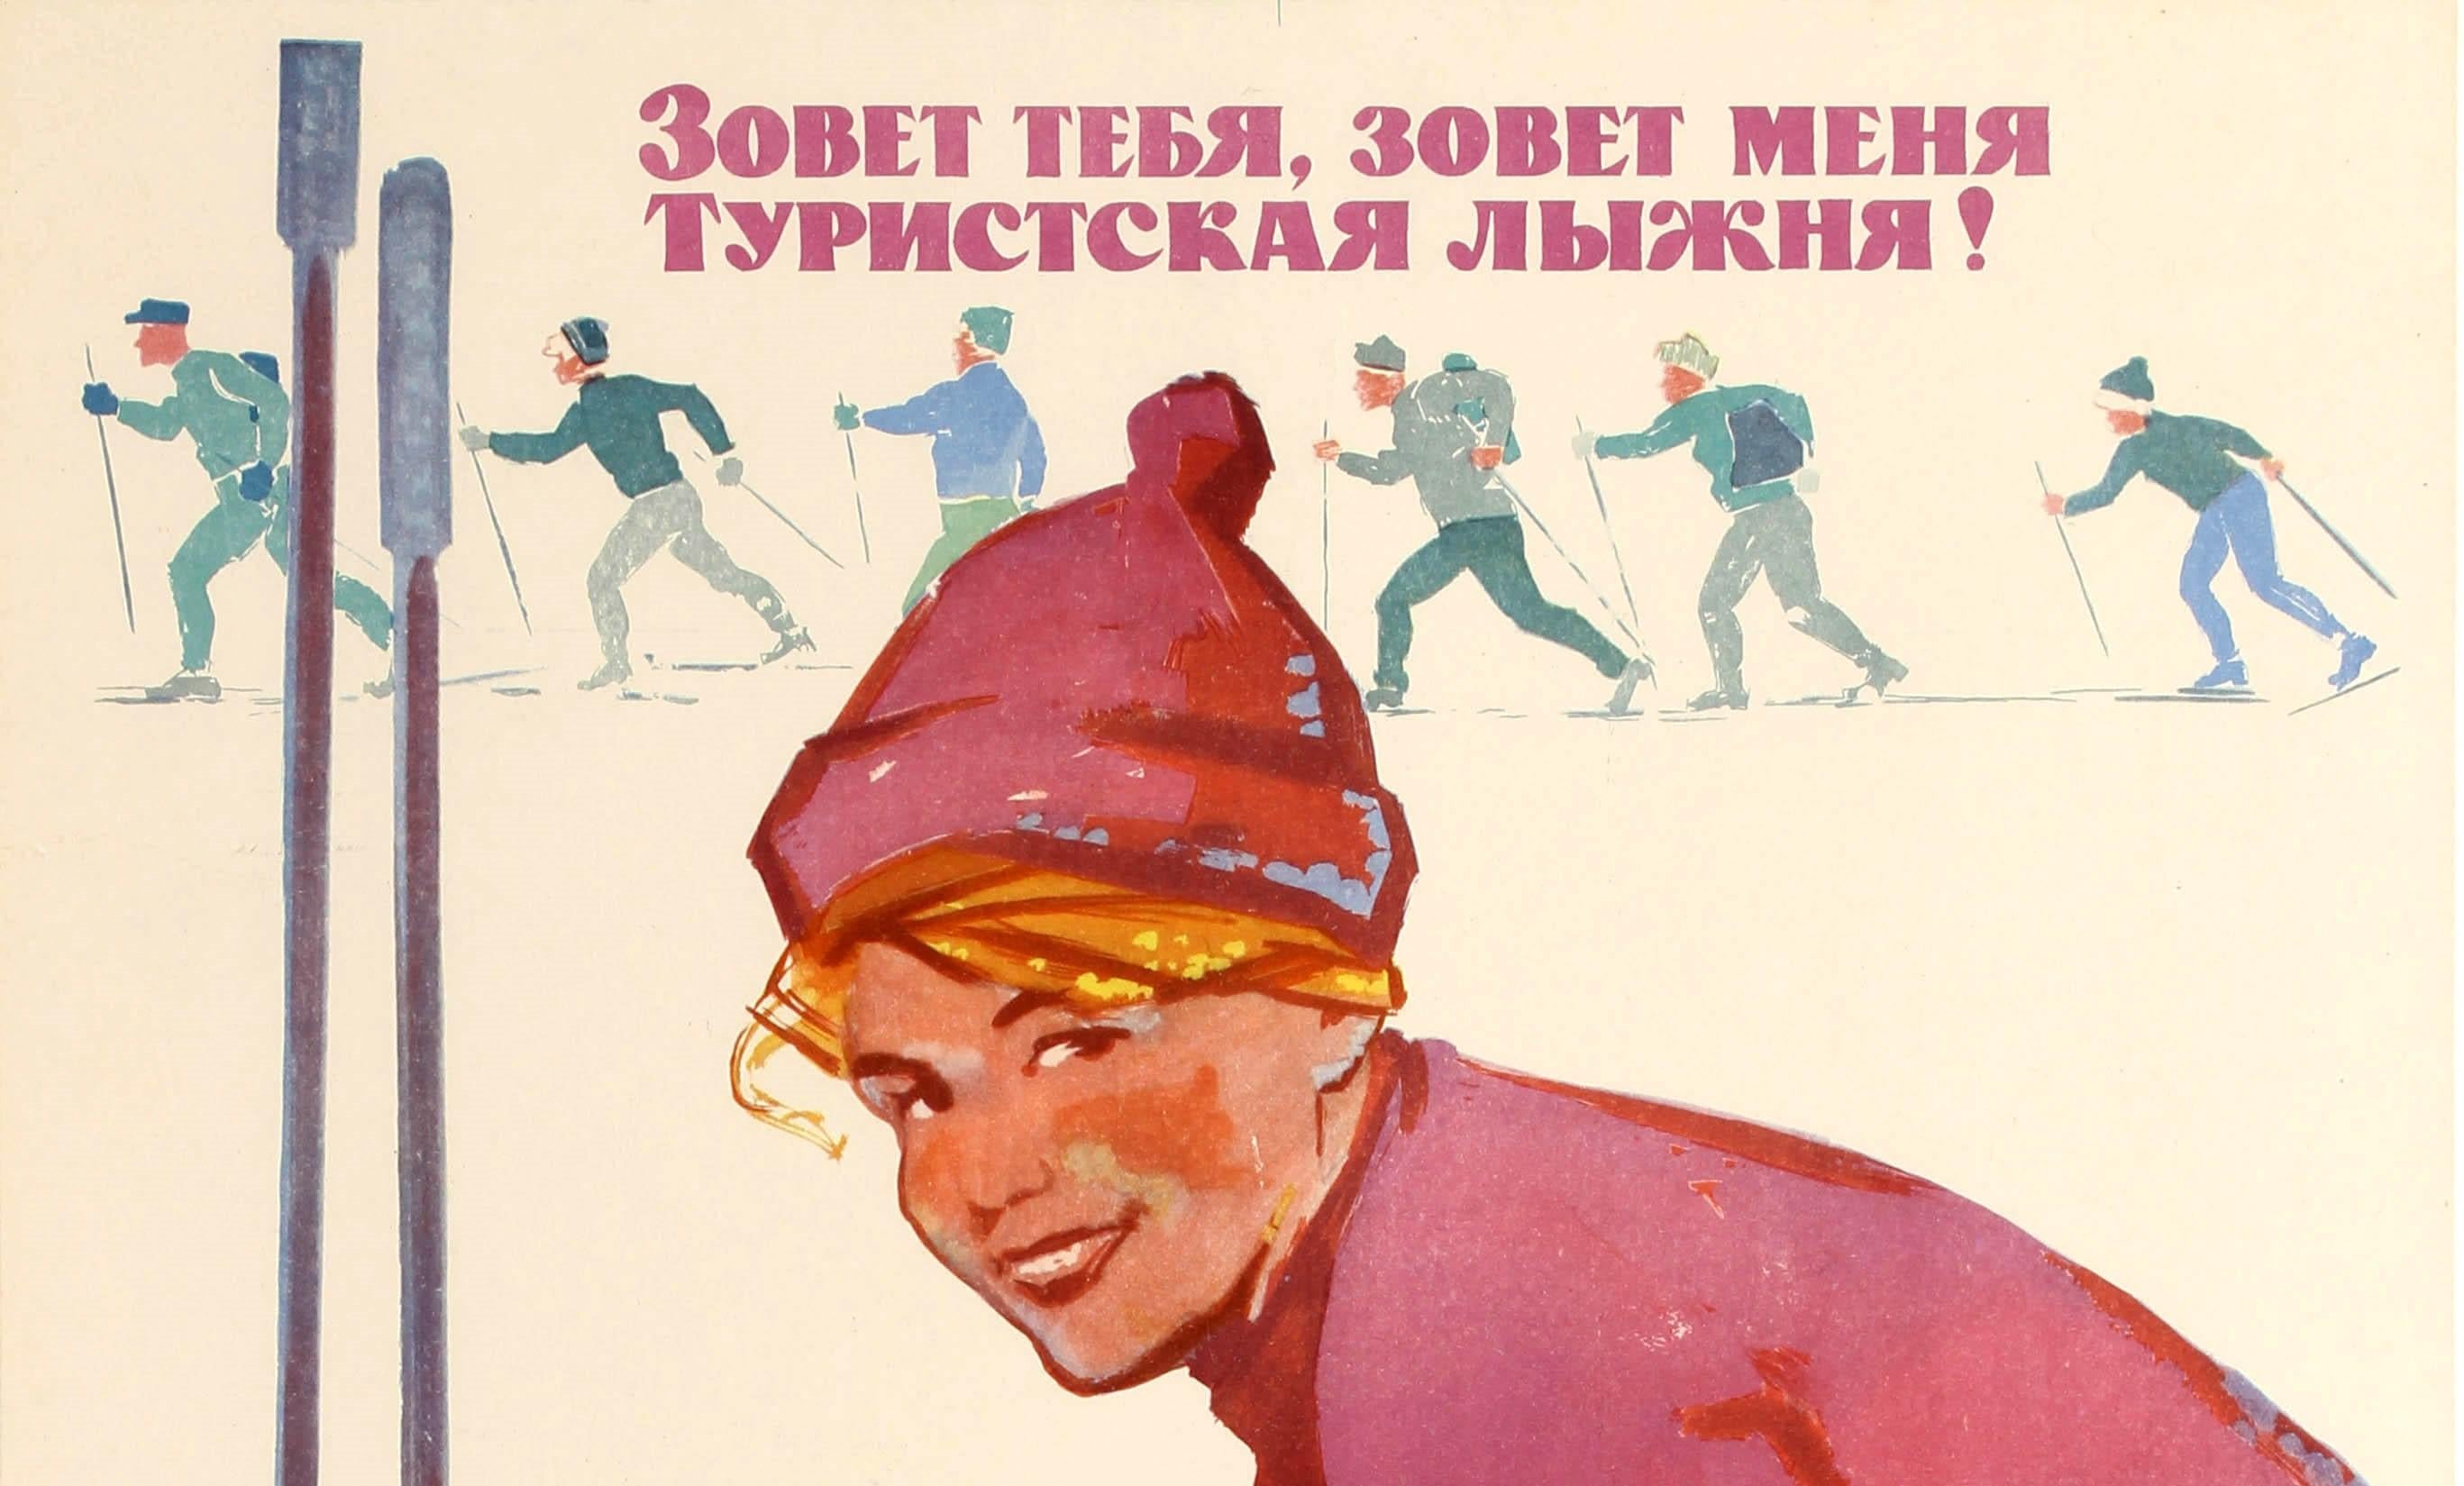 Original vintage Soviet sport poster showing a young lady dressed in pink smiling to the viewer whilst she puts on her wooden skis with her poles standing in the snow in the foreground, a group of skiers cross country skiing behind her in shades of